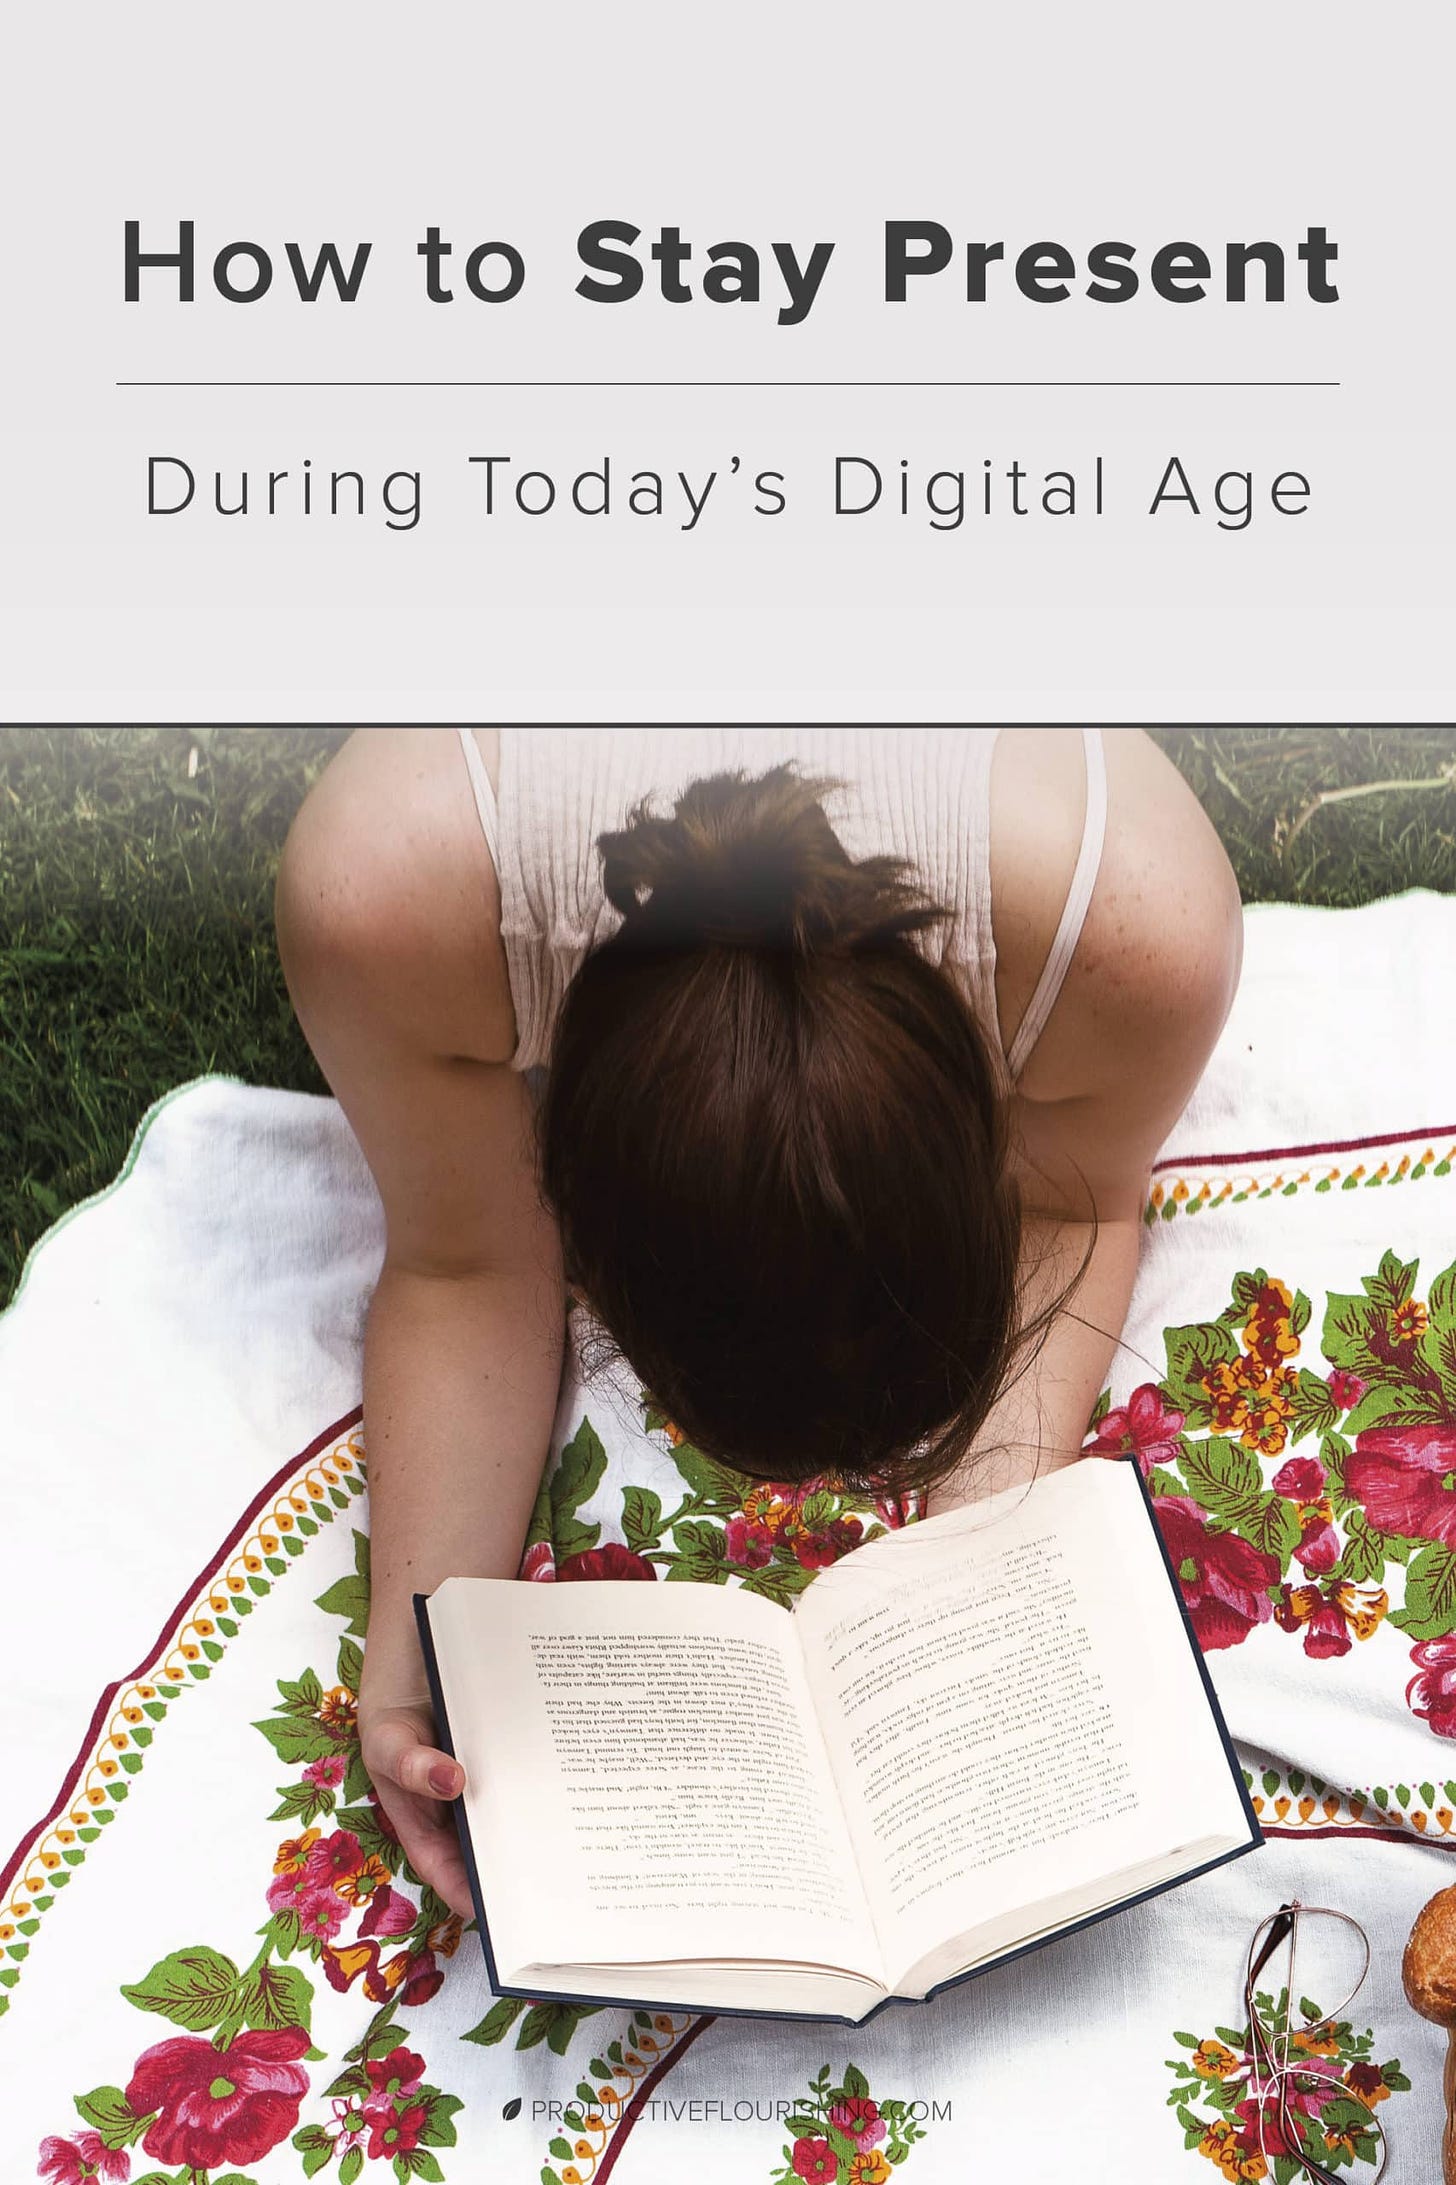 4 Great Ways to Stay Present in the Digital Age. Despite the hundreds of “friends,” we feel more disconnected from others than ever before. I’m not anti-technology, but I am a firm believer in practicing intentionality. Here are some wonderful ways to stay present in the digital age. #technologydisconnect #intentionalpractice #productiveflourishing